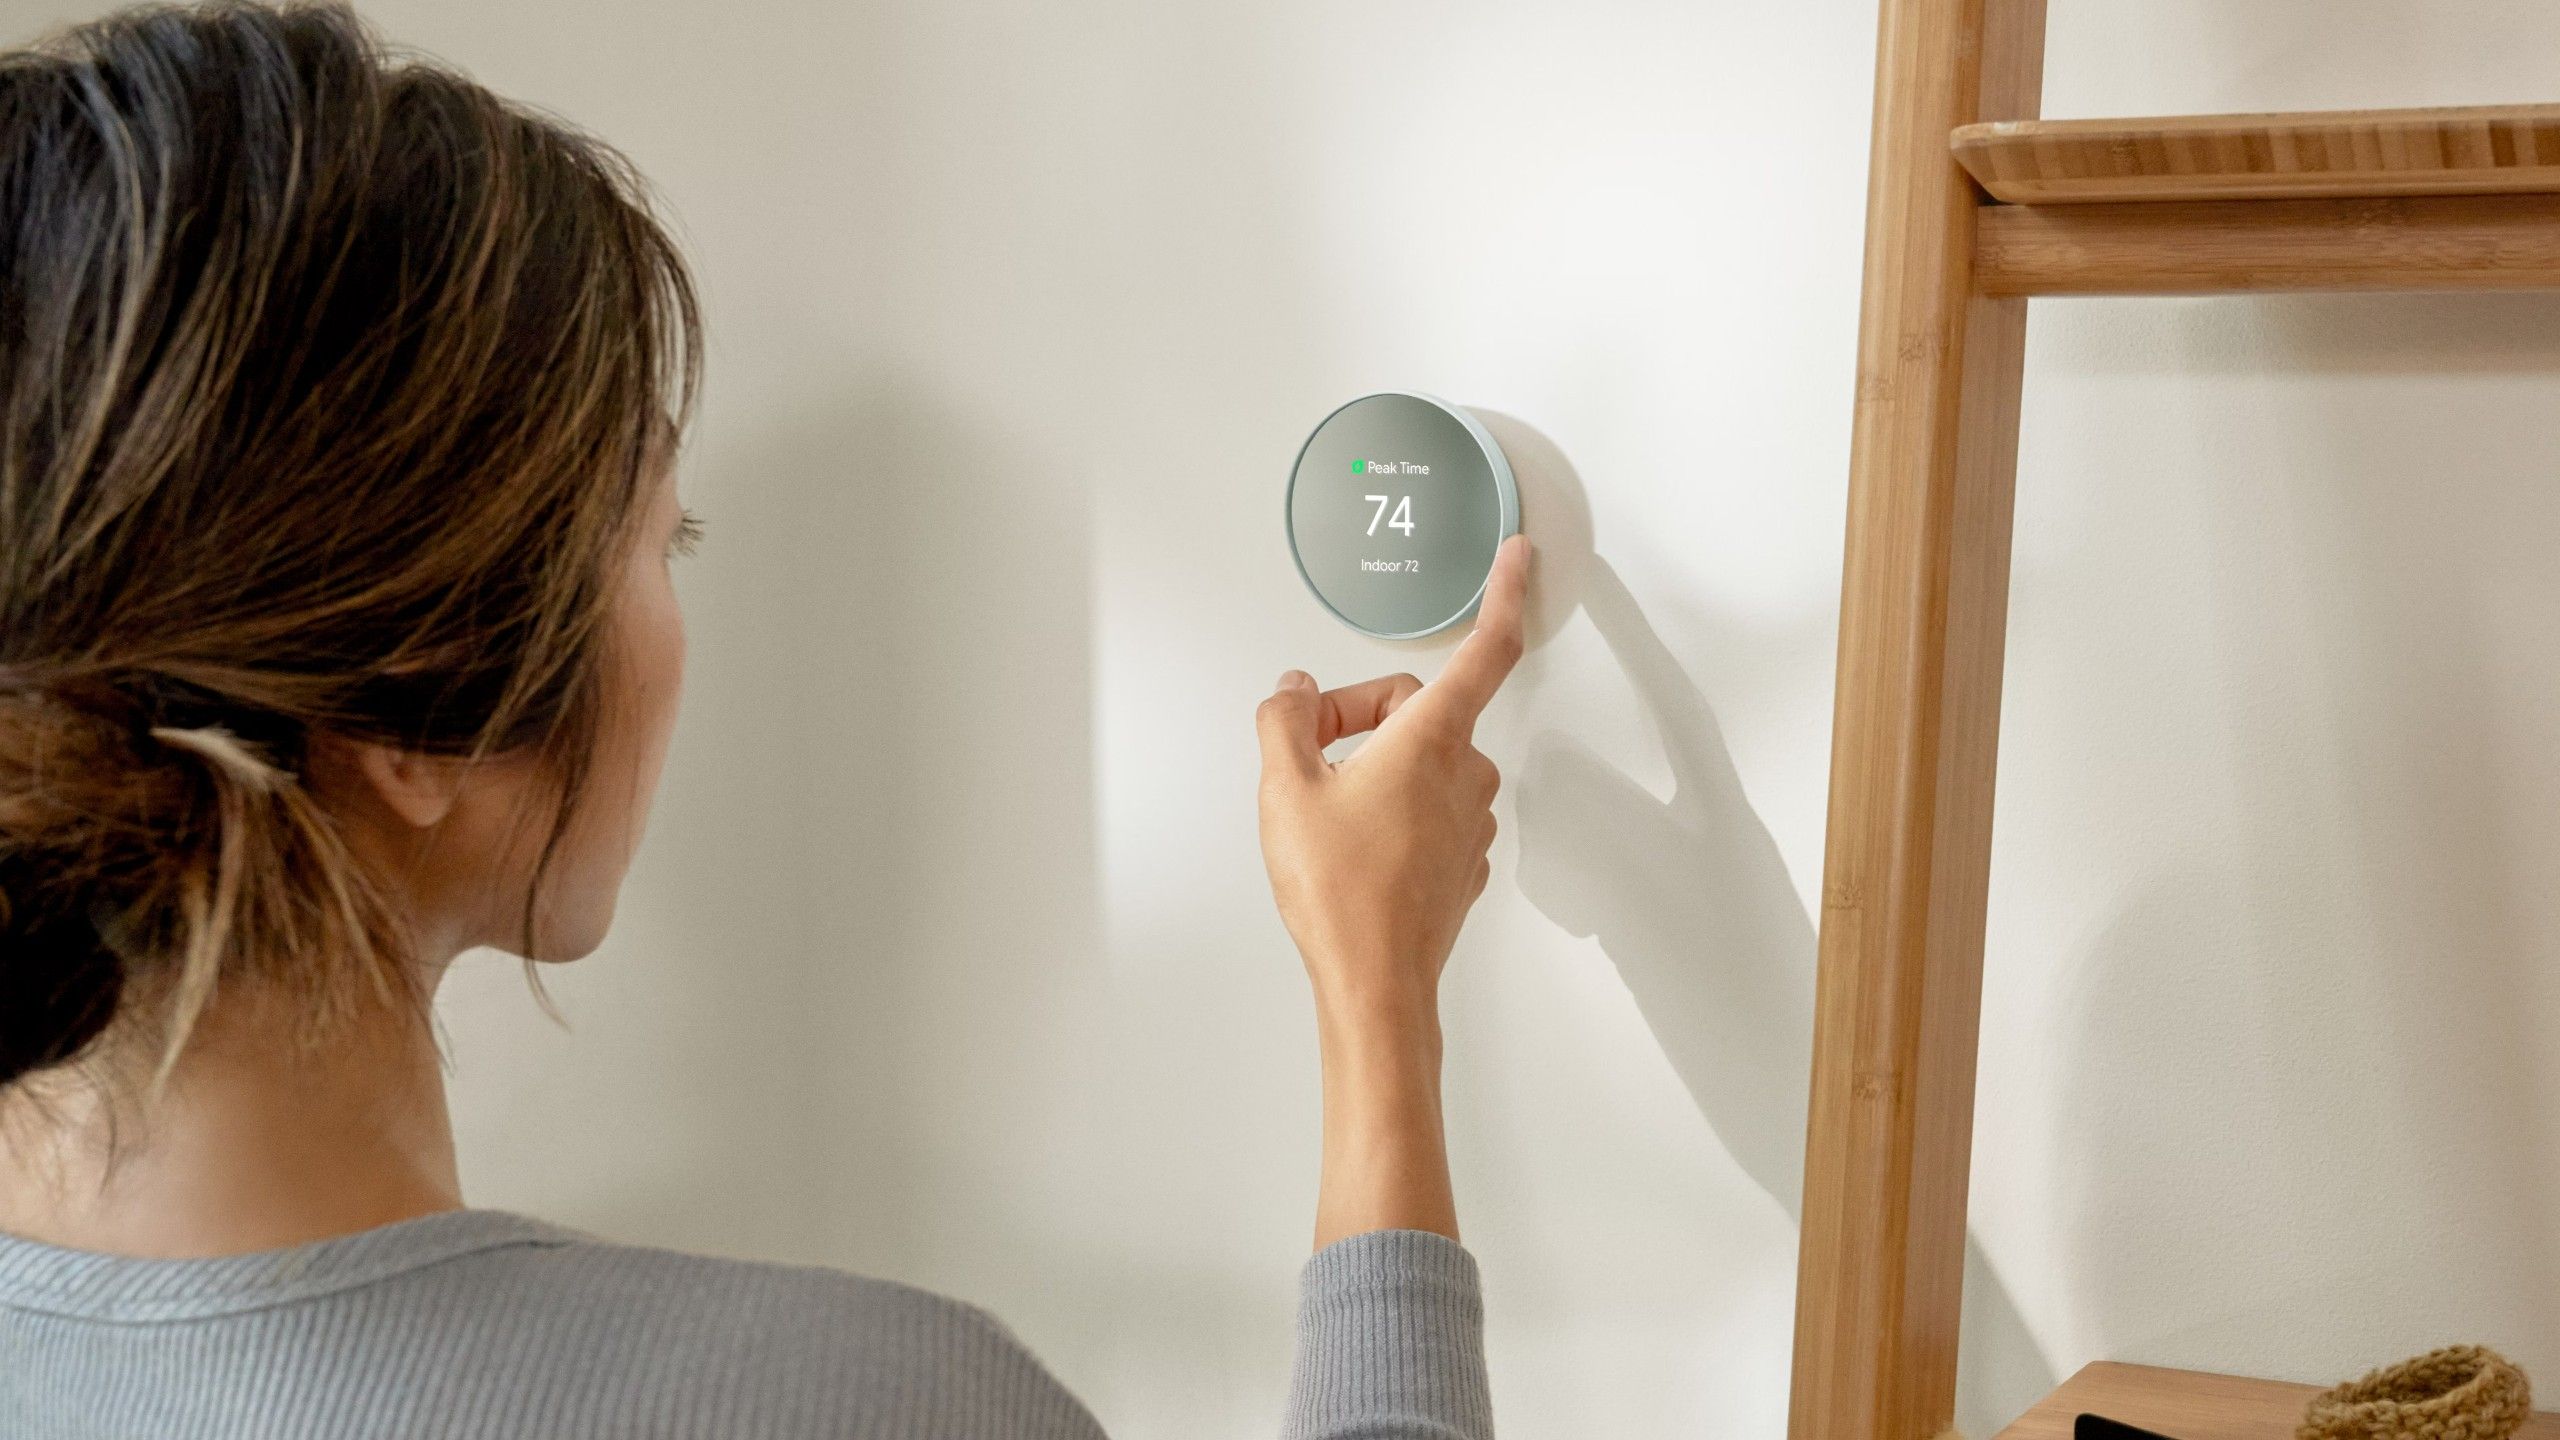 A woman sets the temperature with a Nest Thermostat